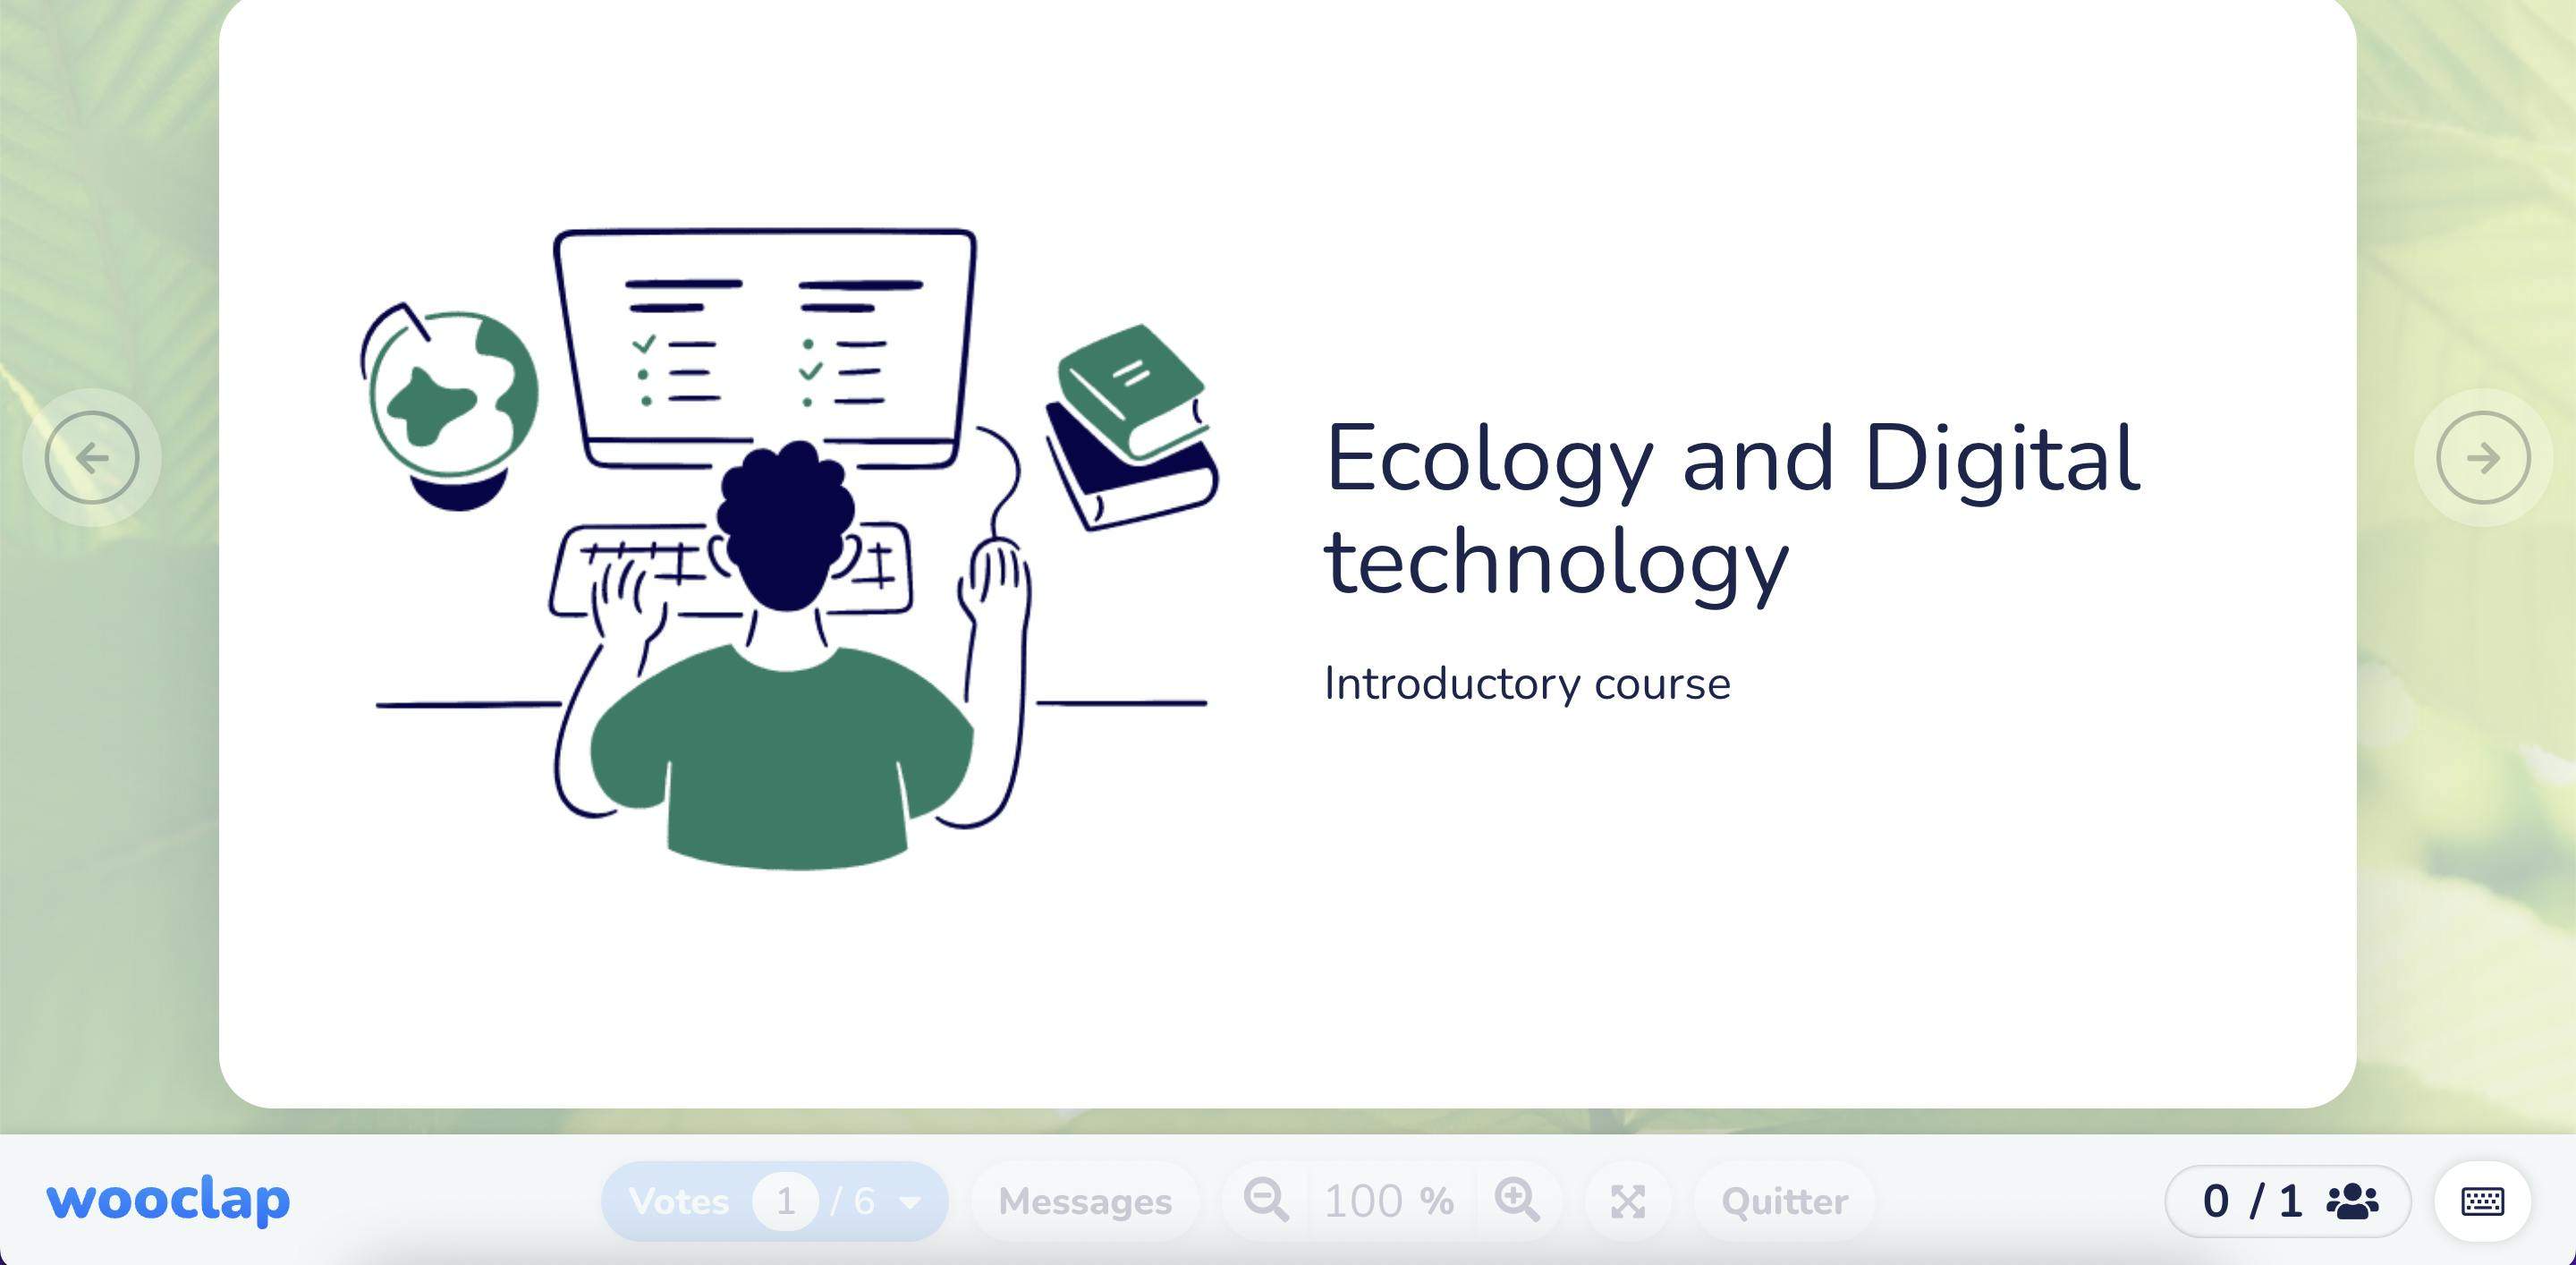  Ecology and Digital technology